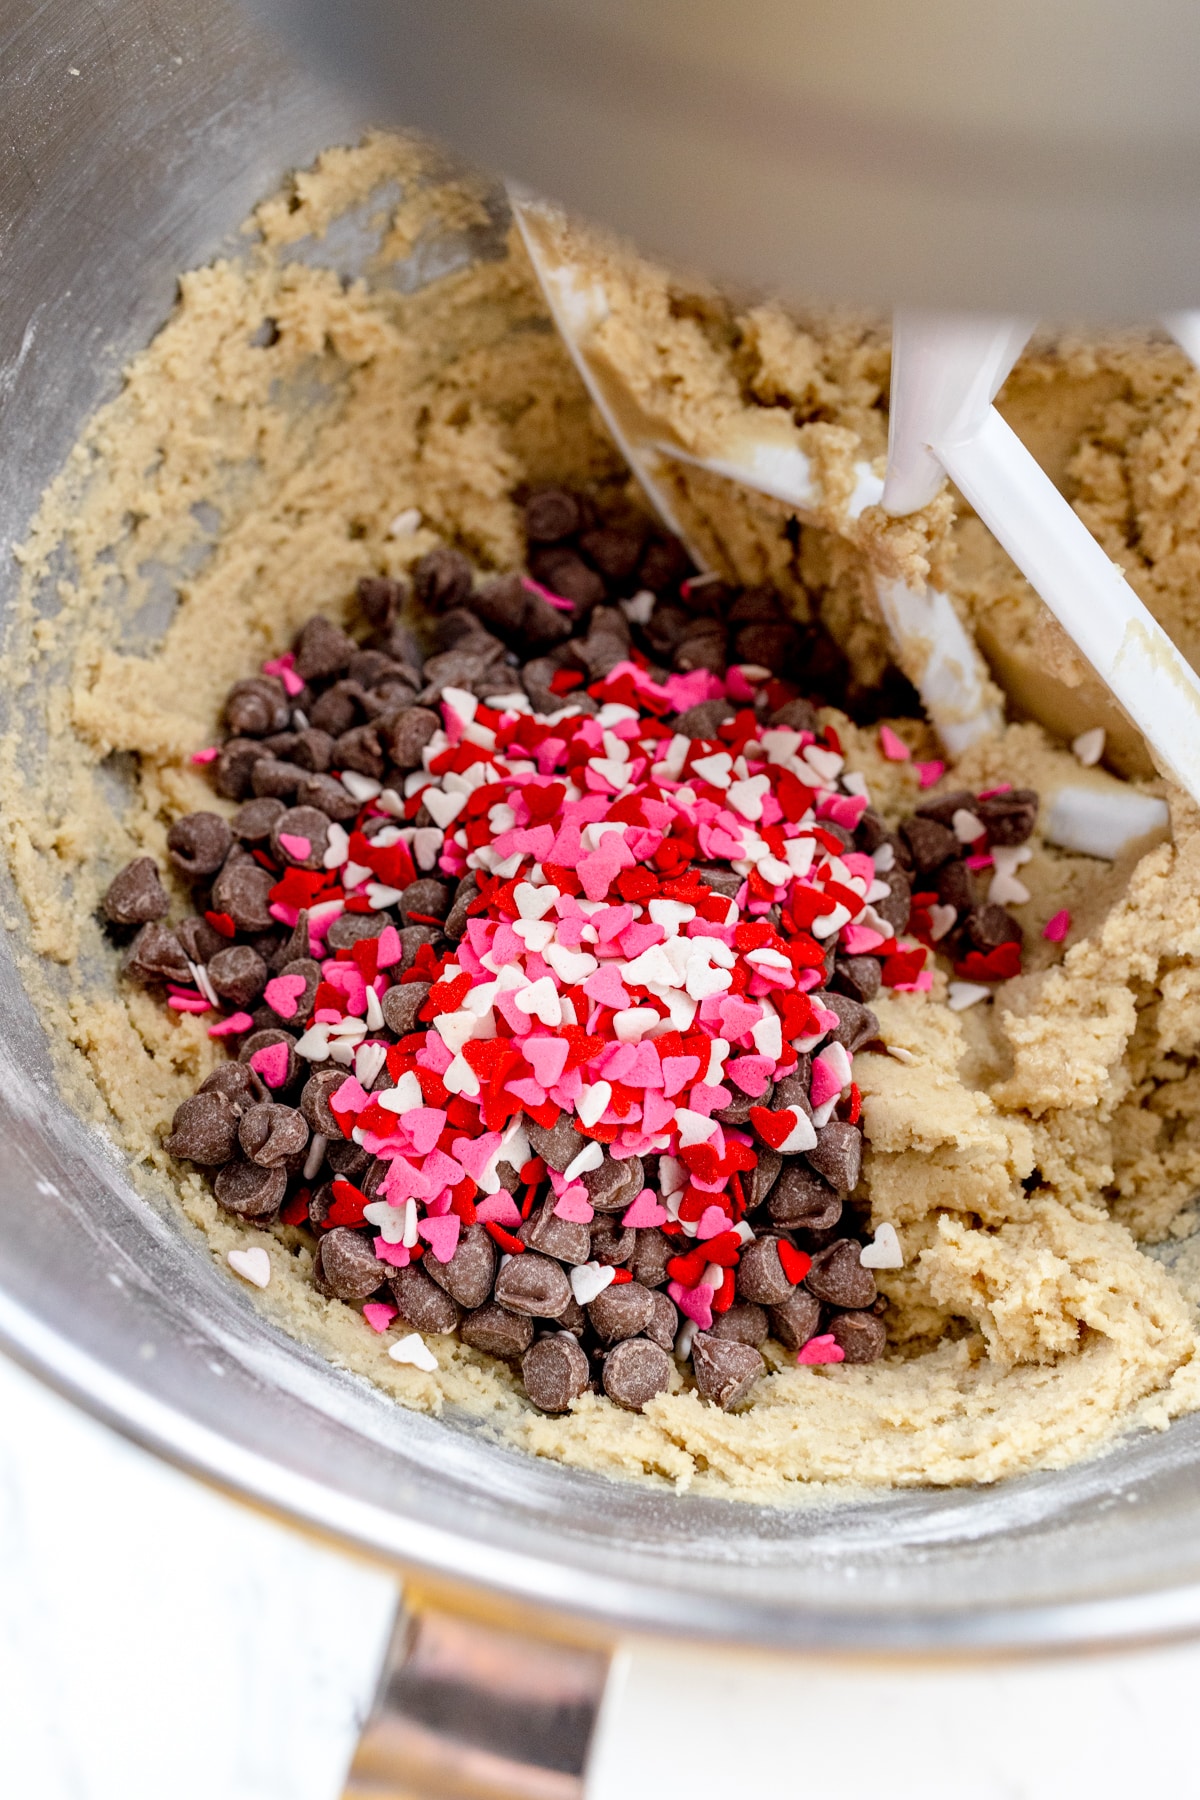 Close up of the bowl of a stand mixer with cookie dough in it with chocolate chips and sprinkles that have been added on top to mix in.